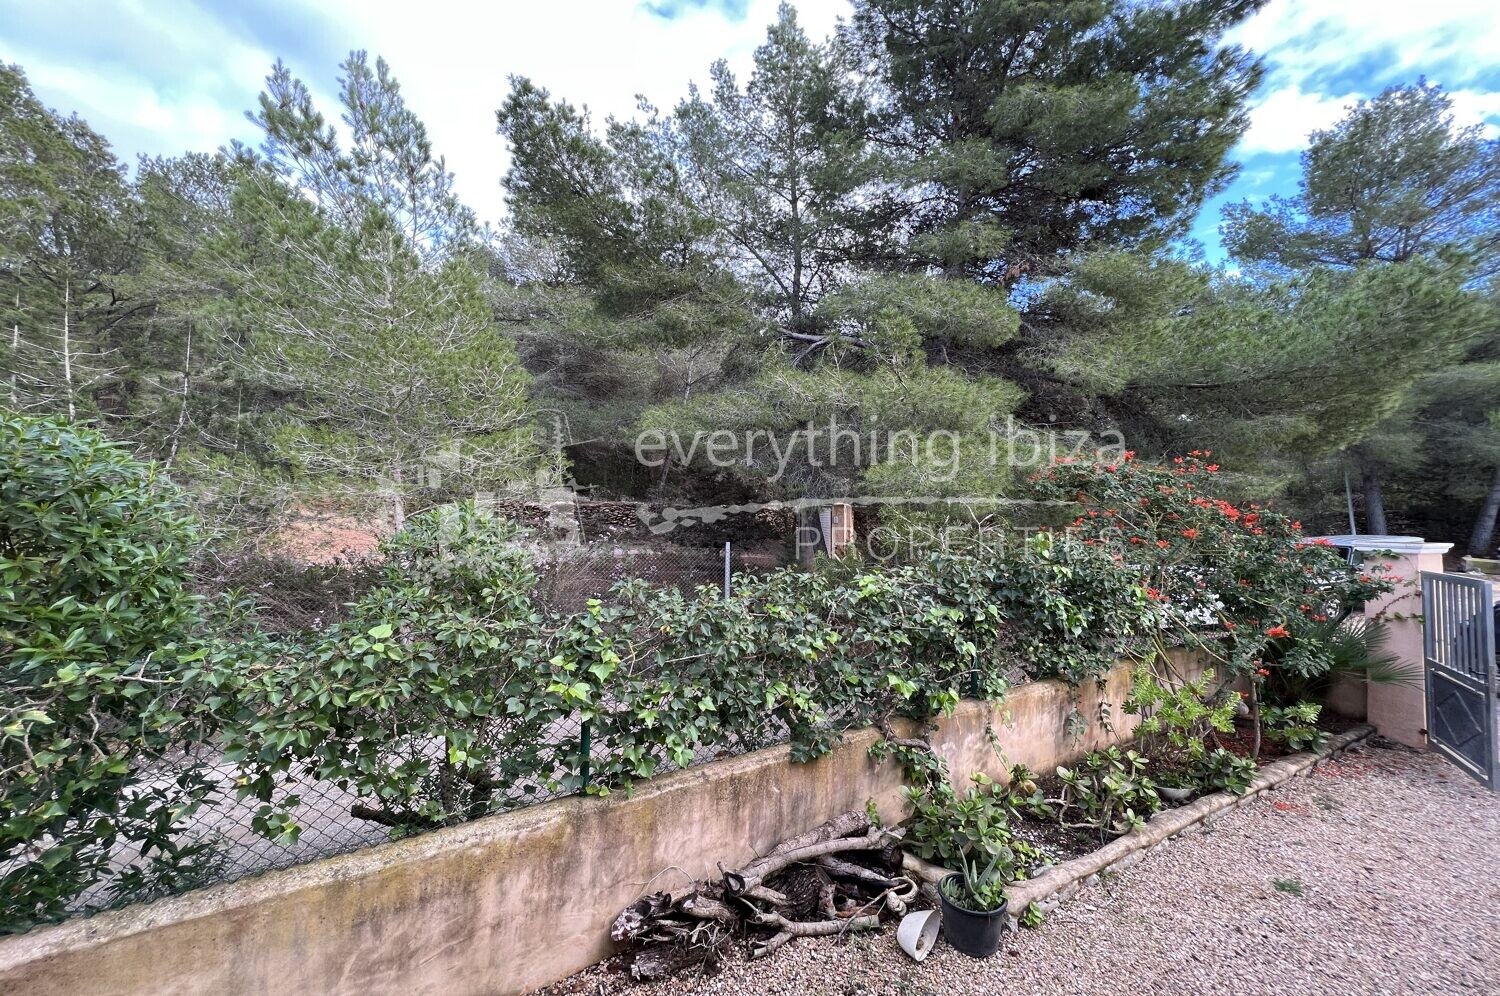 Charming Villa with Pool Close to Sant Josep Village, ref. 1398, for sale in Ibiza by everything ibiza Properties